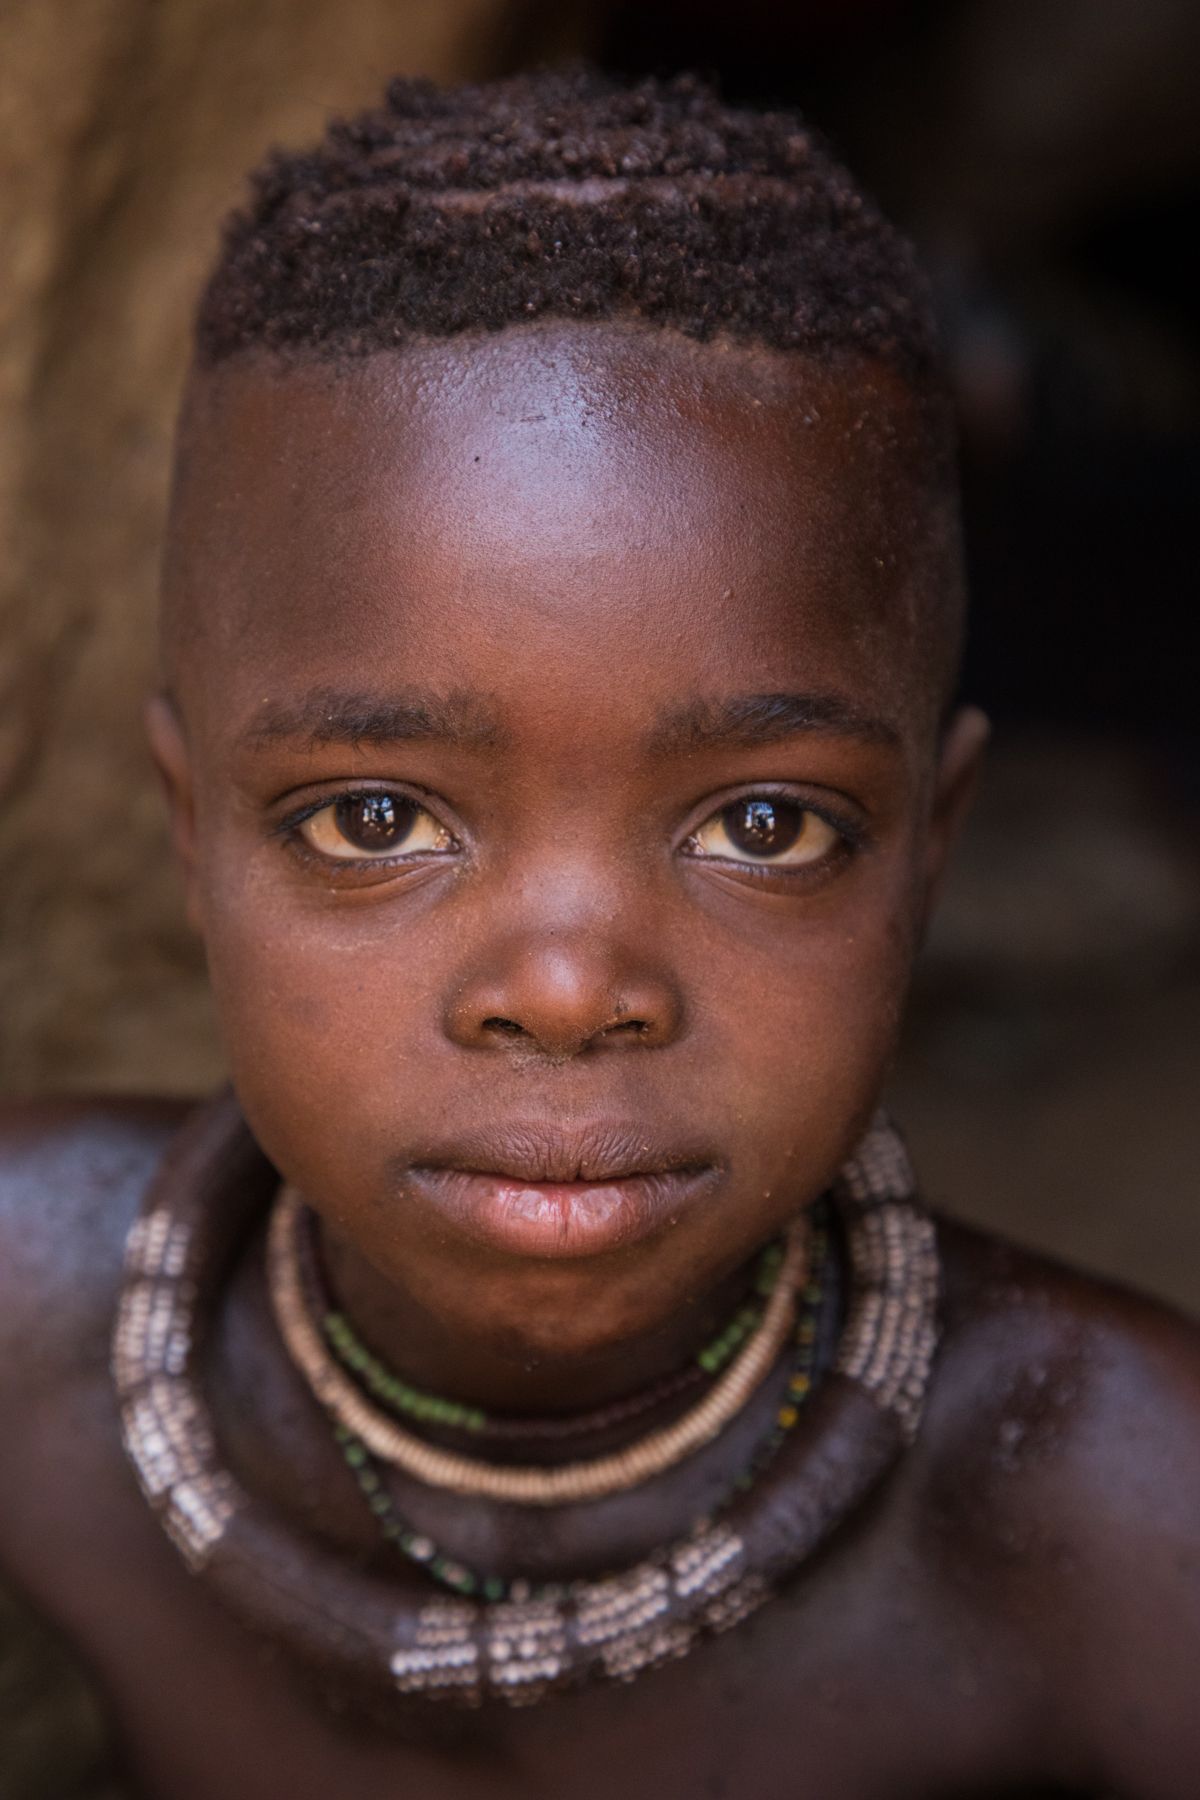 Portrait of a young Himba boy on our photography tour of Namibia